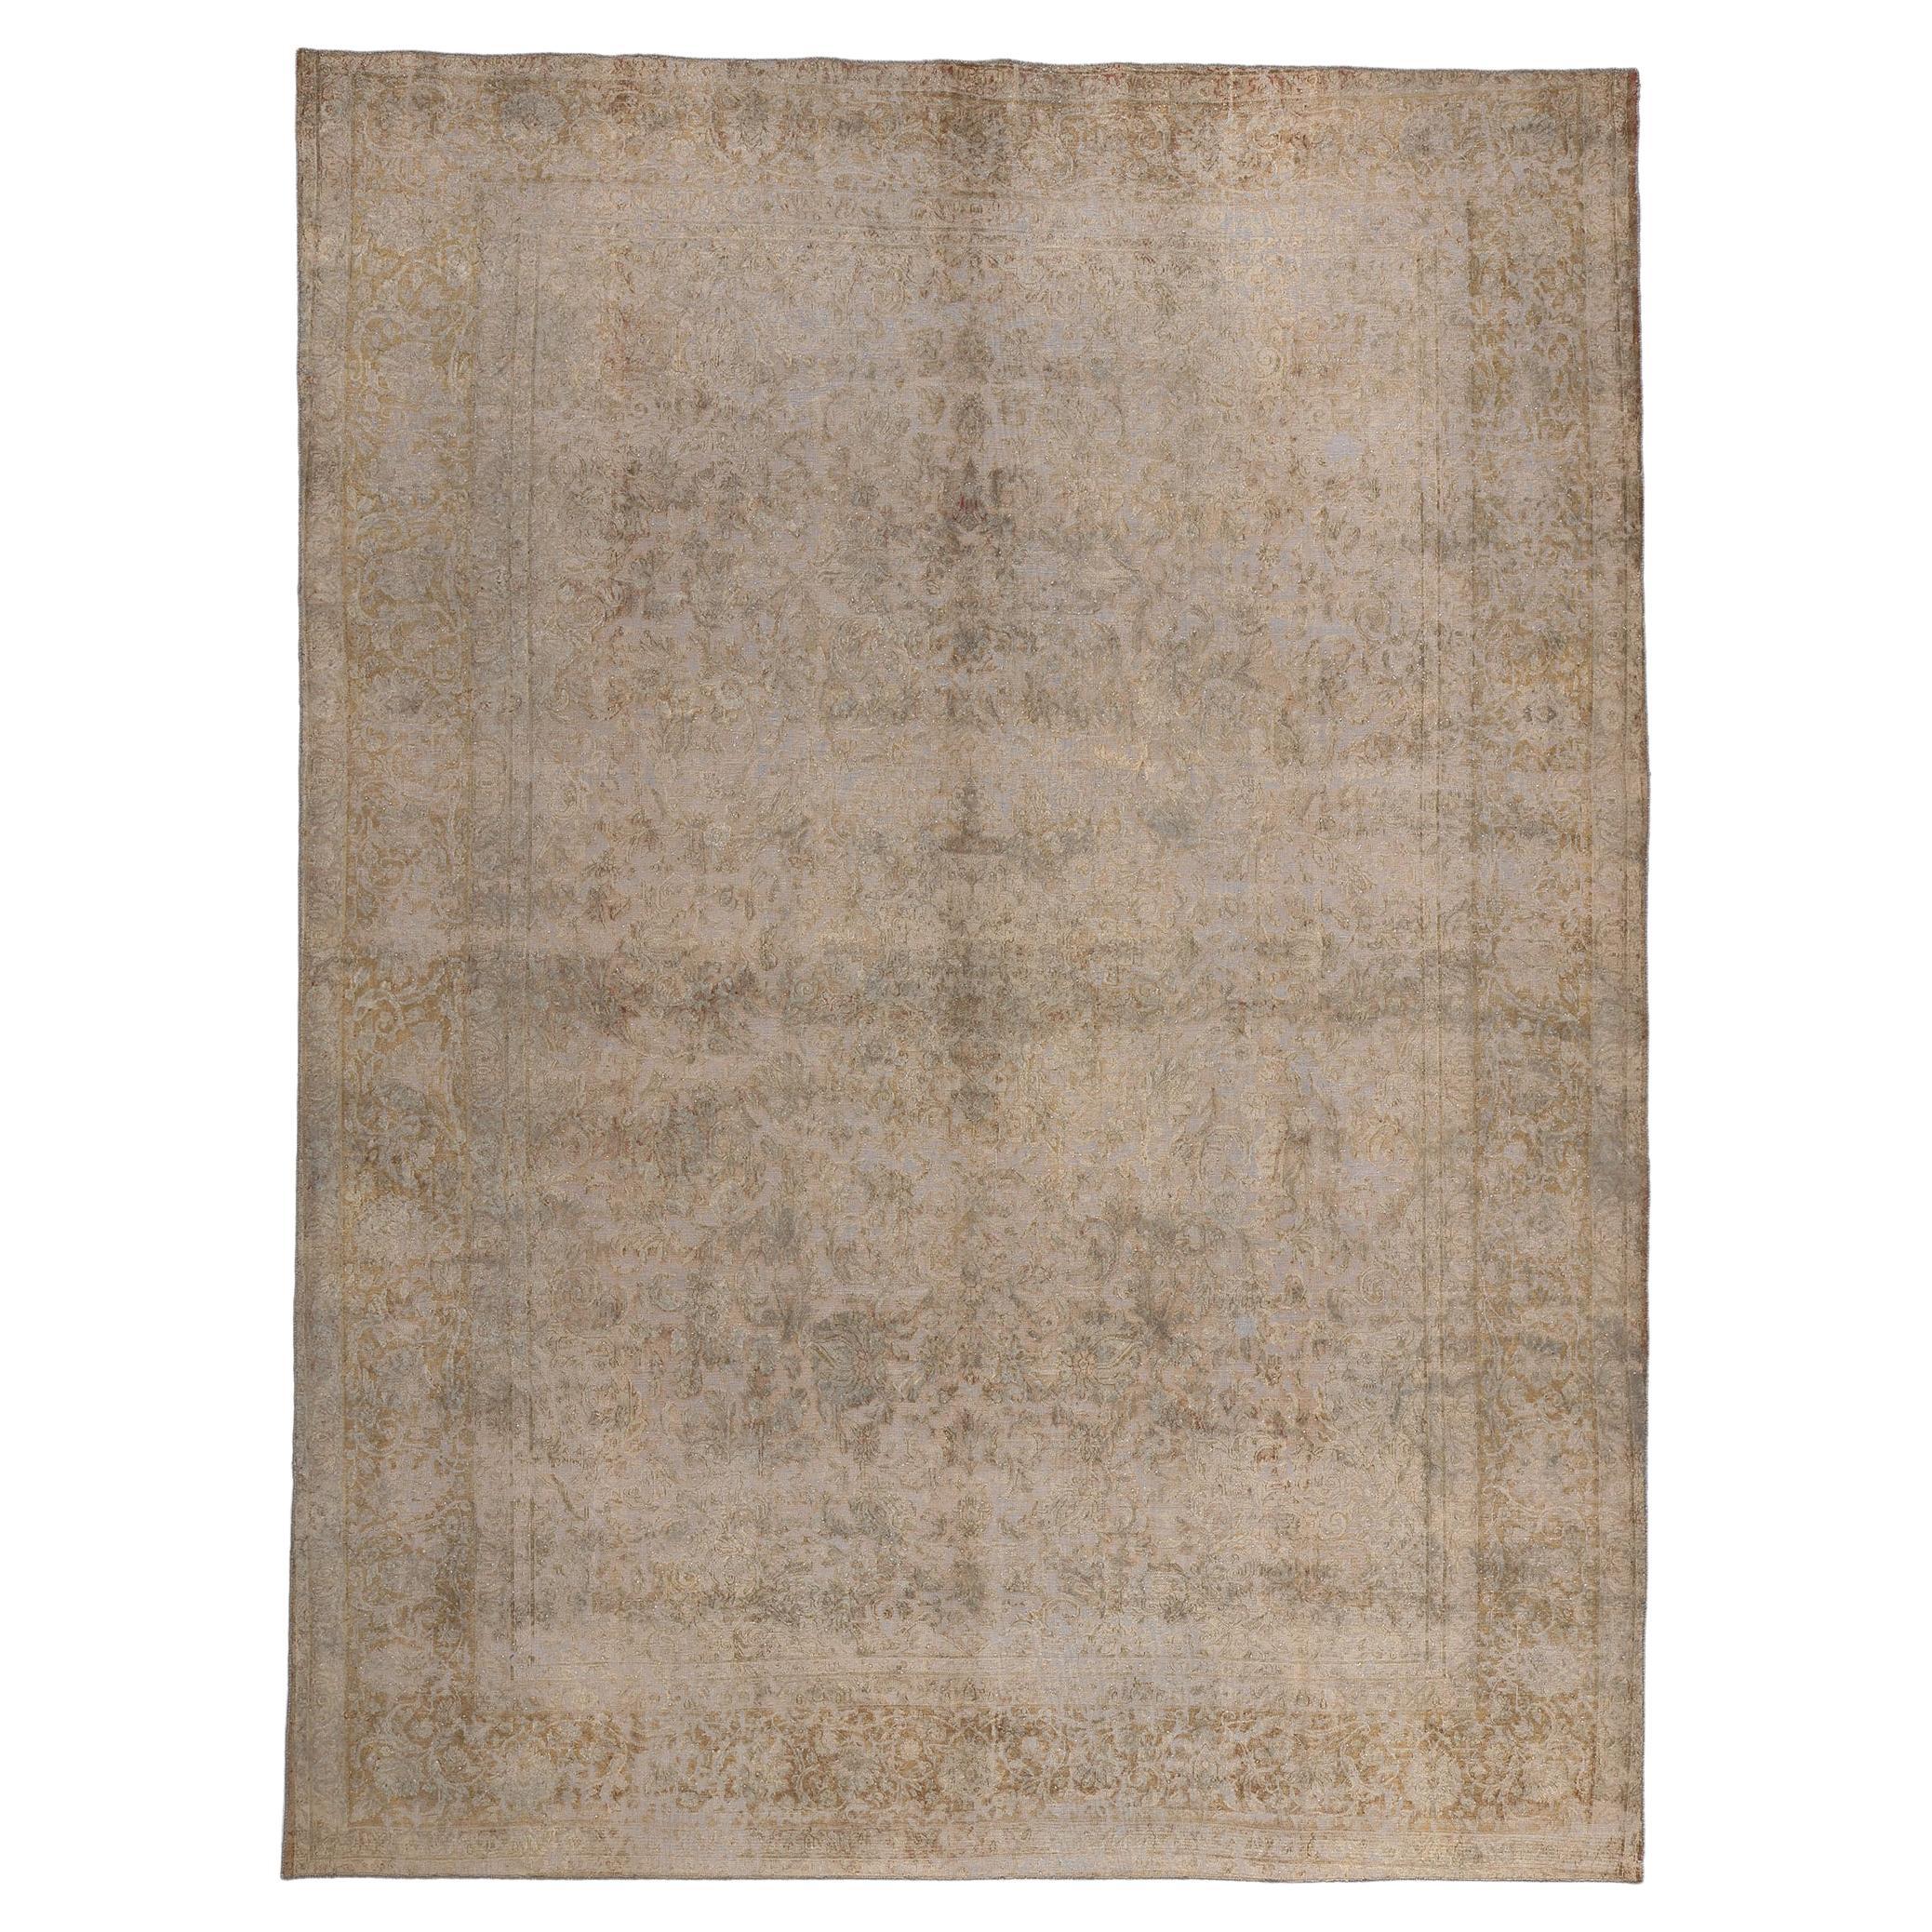 Vintage Turkish Overdyed Rug, French Industrial Meets Quiet Sophistication For Sale